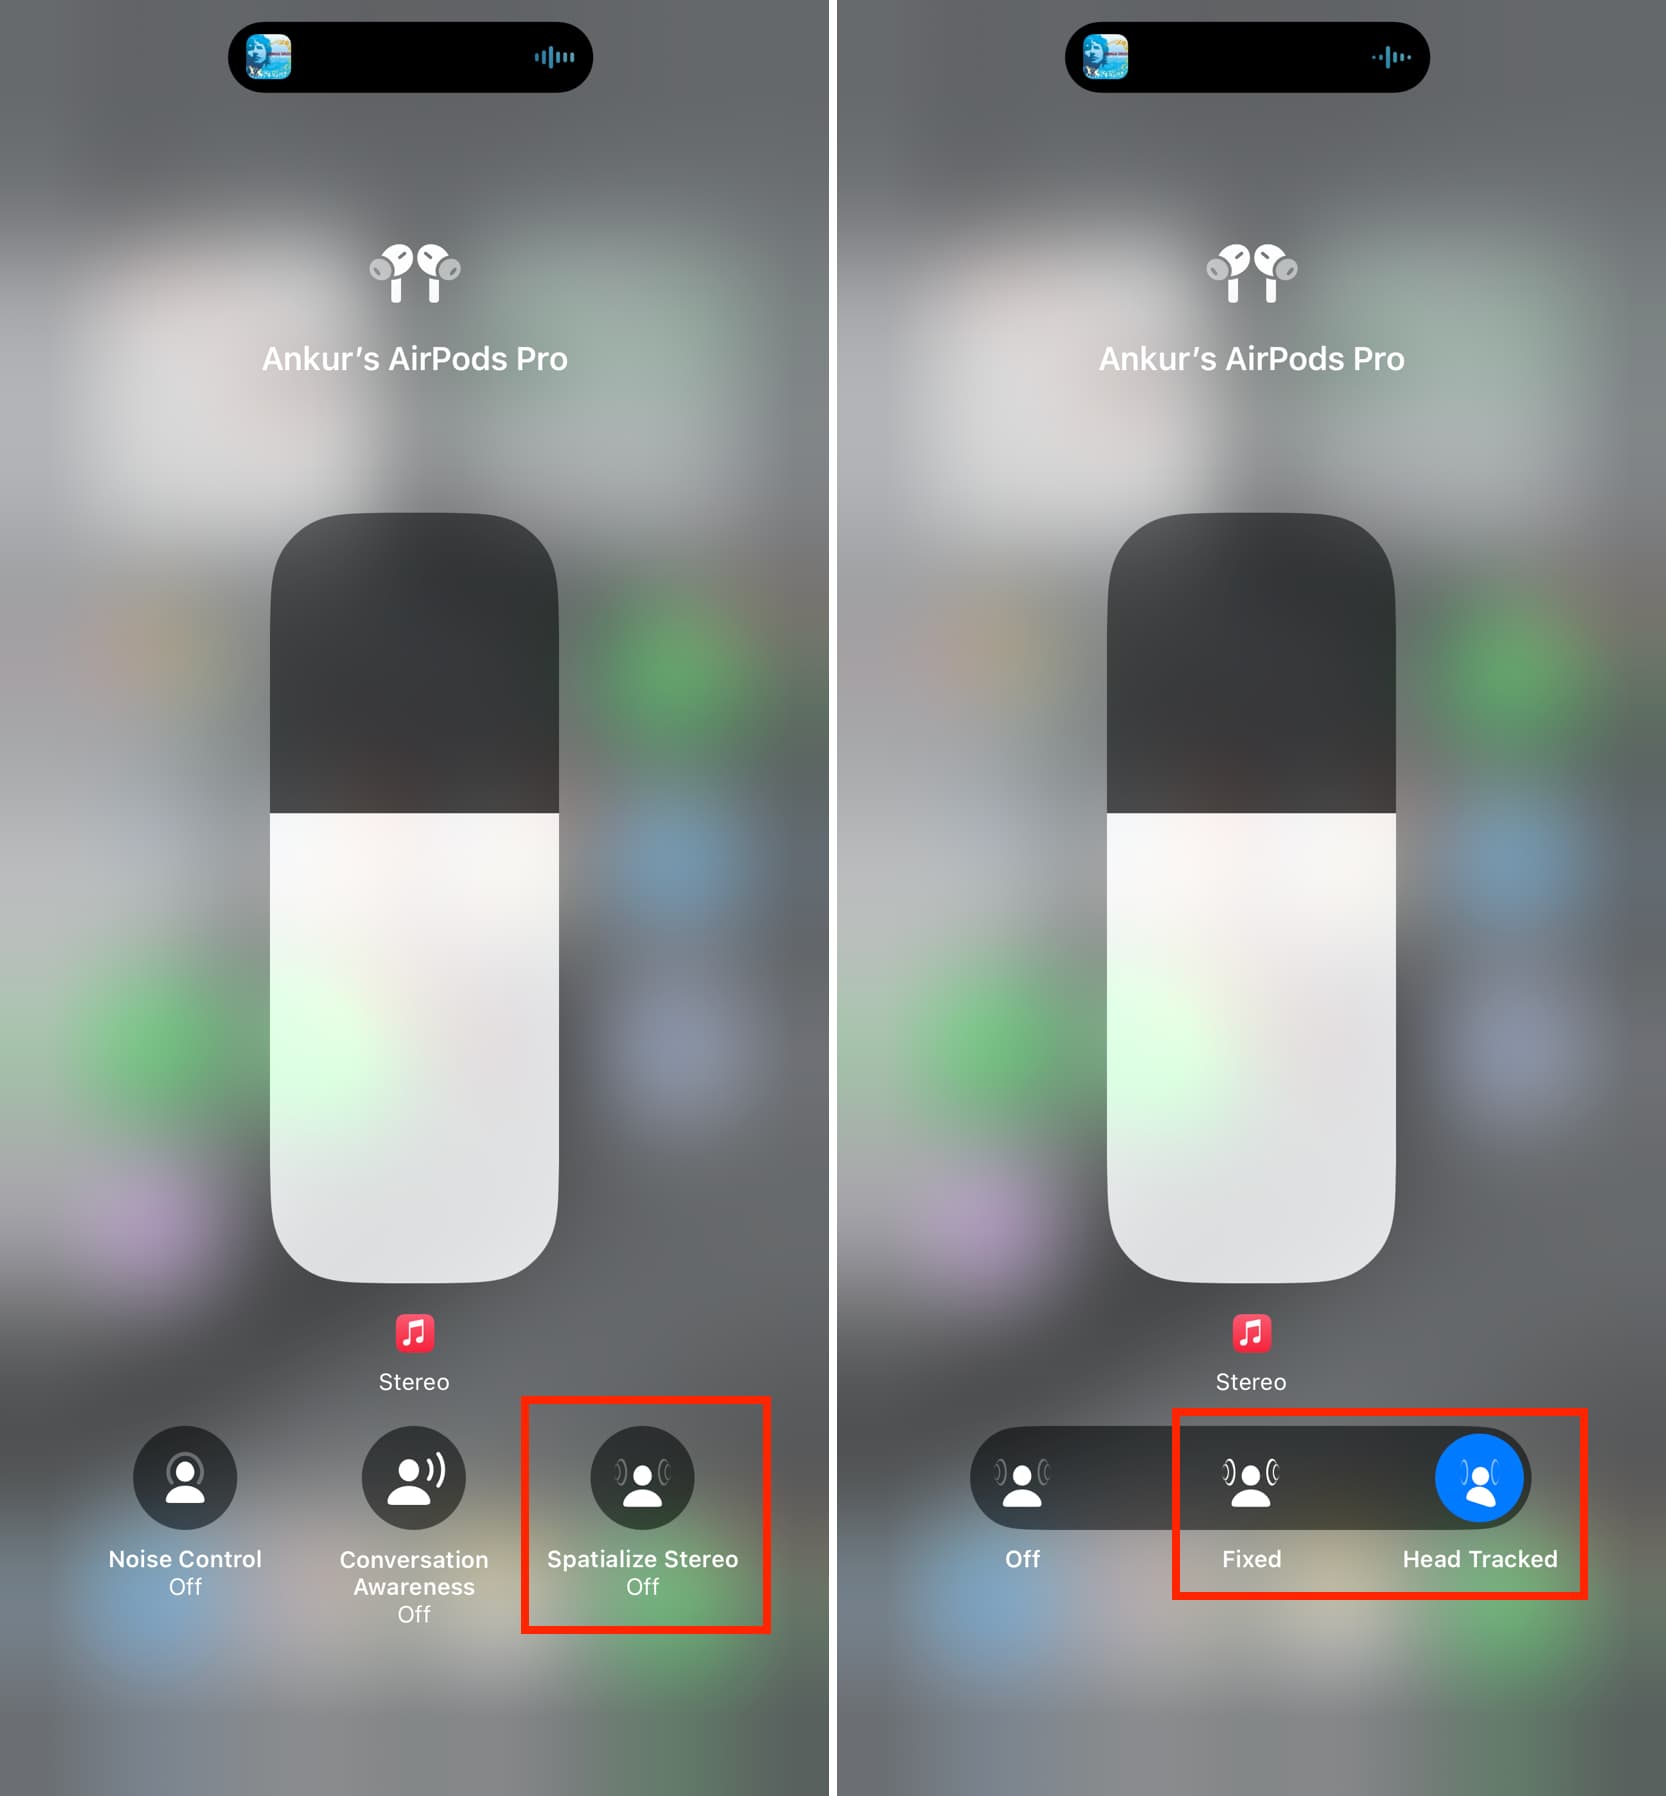 Spatialize Stereo mode for AirPods Pro